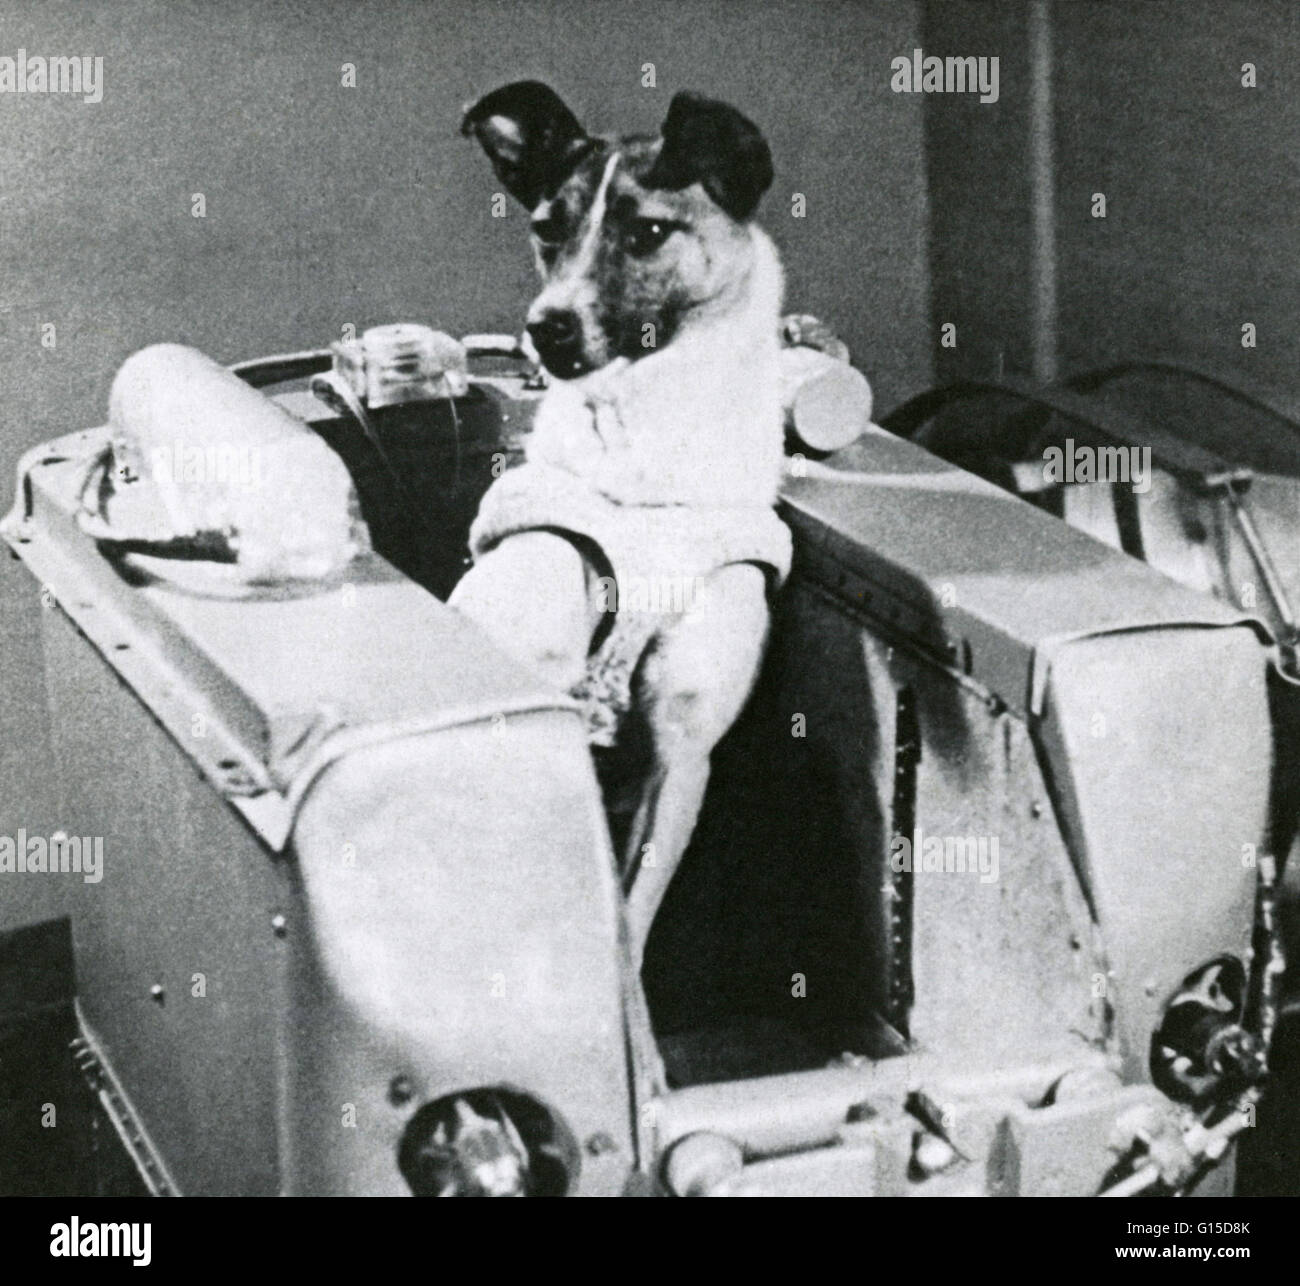 Laika, the first canine in space, inside a mock-up of the cabin of the  Soviet Sputnik 2 spacecraft. Sputnik 2 was launched on 3 November 1957.  Laika (meaning 